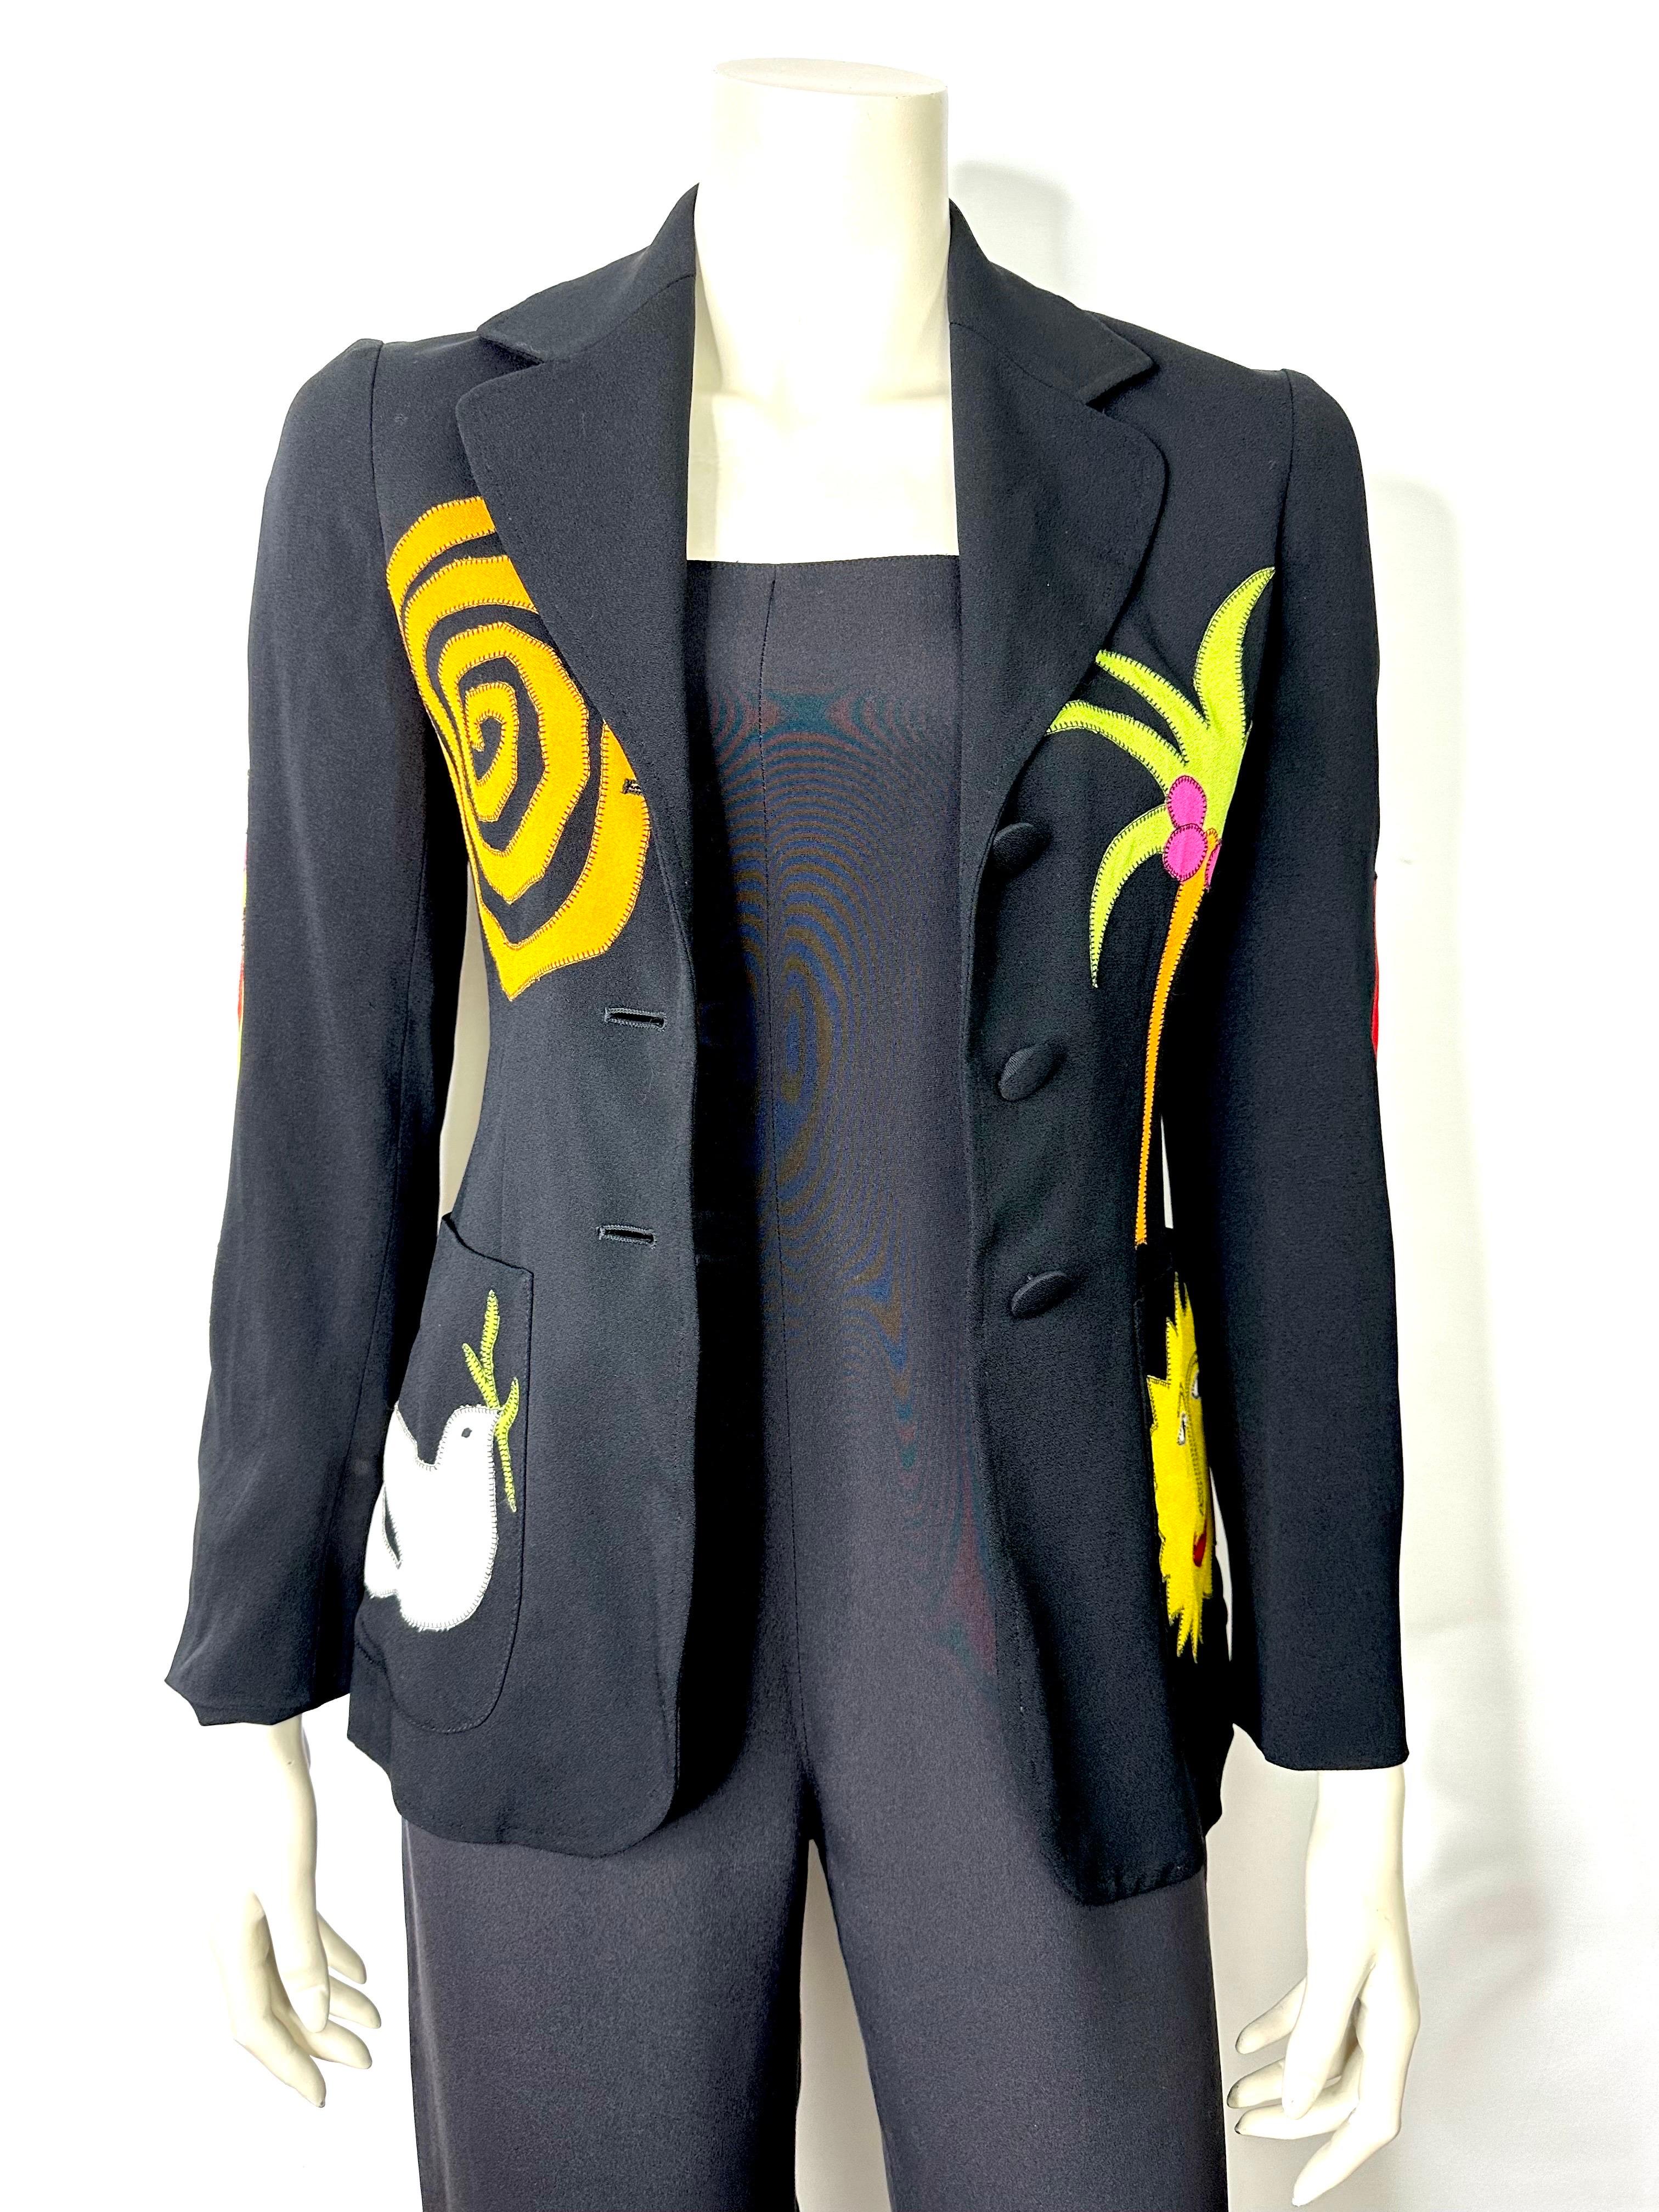 Moschino blazer Cheap and chic , made famous by Iris Apfel and Fran Drescher aka Fran Fine in the TV series the Nanny.
Fitted, fabric-covered buttons, large open pockets.
Made in Italy
79% acetate
21% rayon
Size 36FR, please refer to